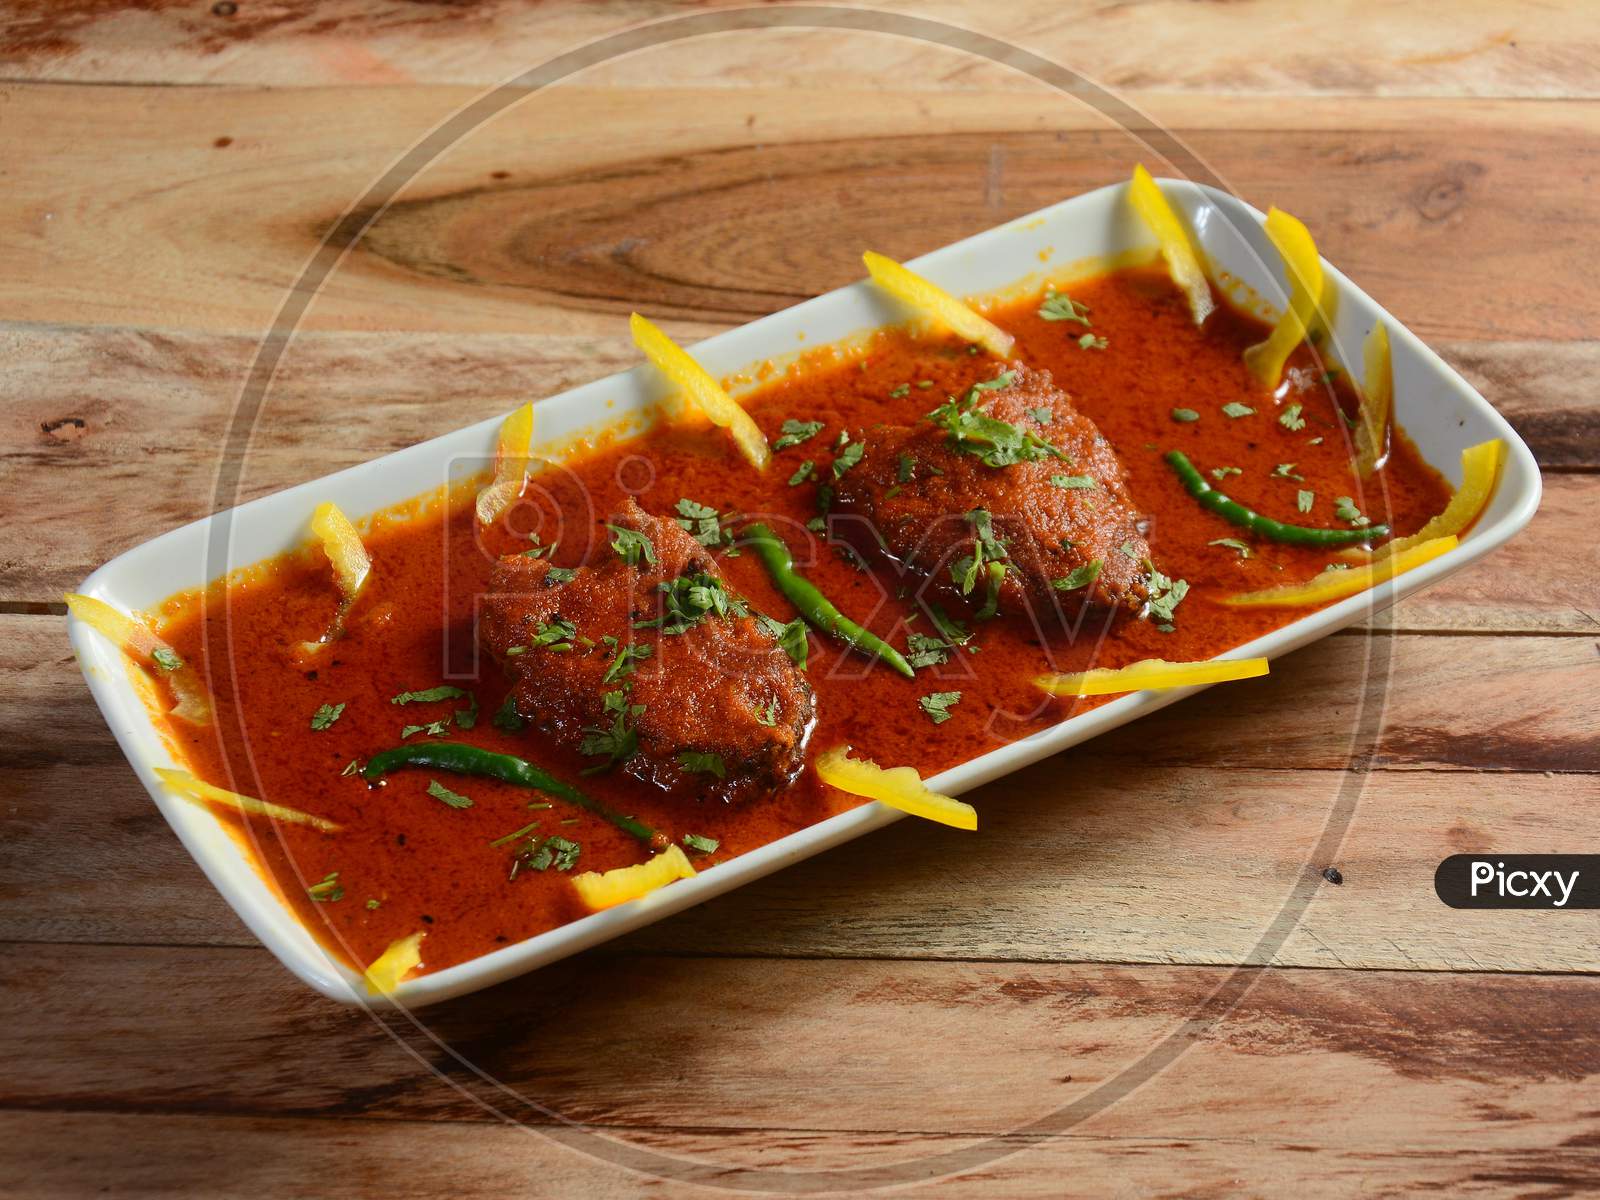 Traditional Bengali Cuisine - Katla Curry Is Bengali Fish Recipe Served On A Ceramic White Bowl, Selective Focus